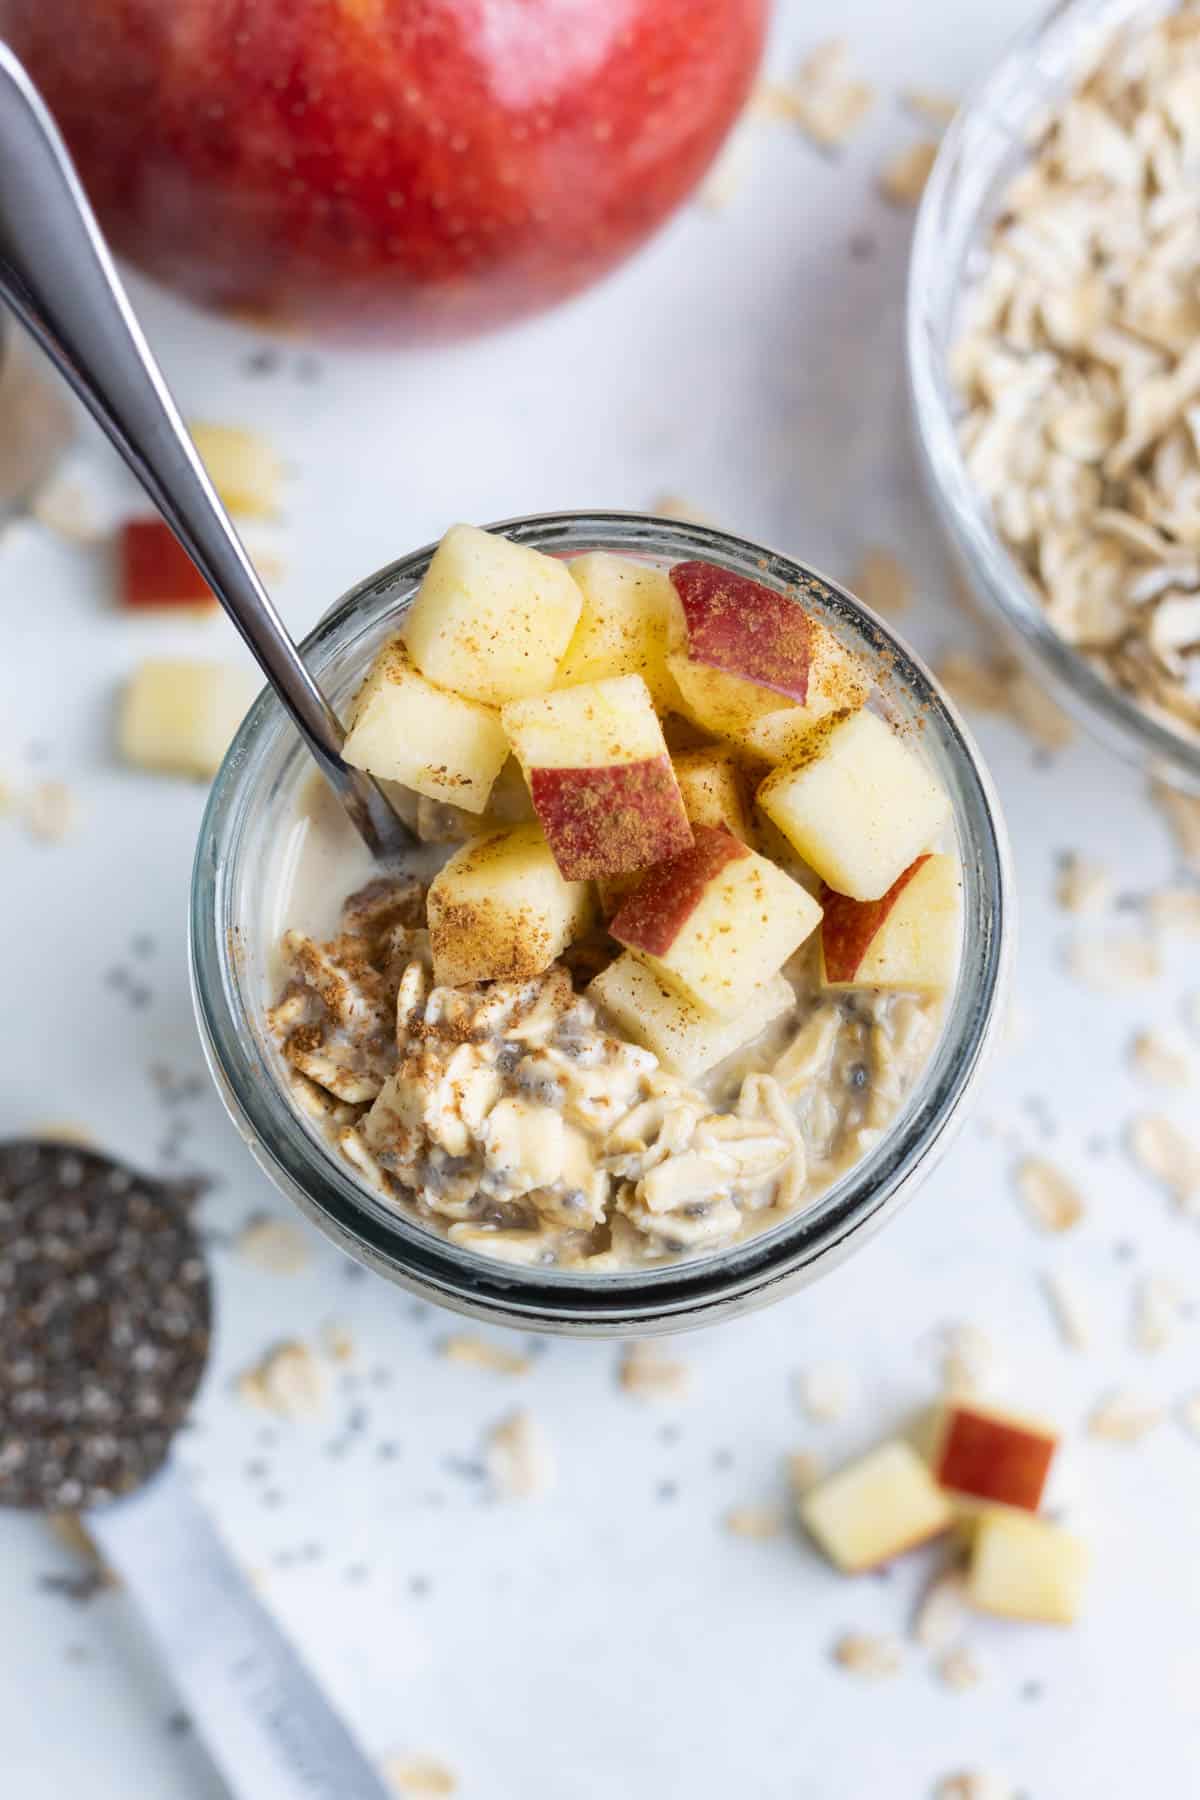 Overnight oats made with apples and cinnamon in a glass for an easy breakfast.